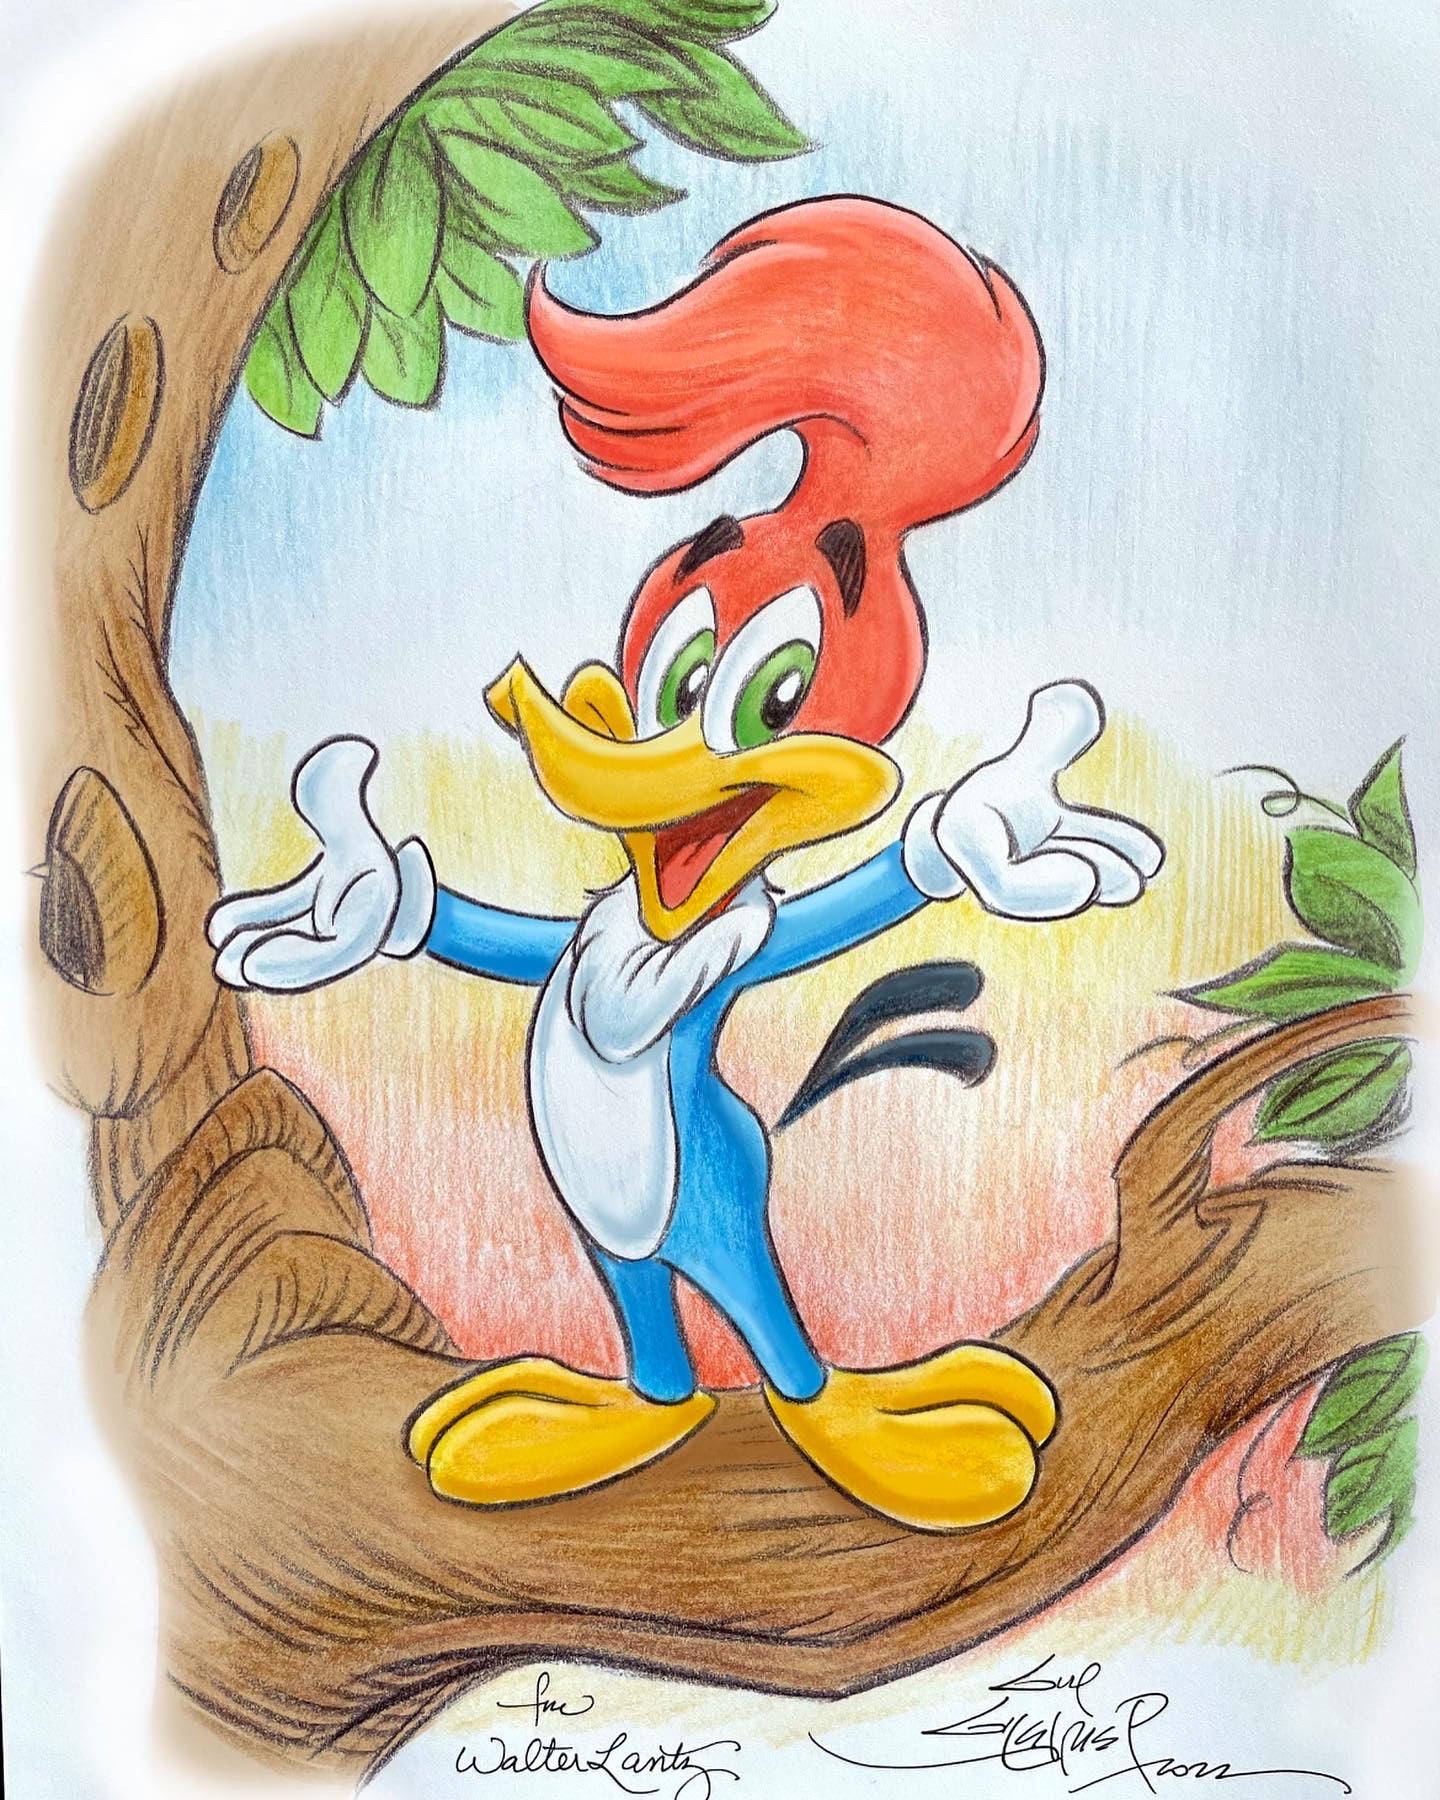 Woody Woodpecker 8.5x11 Art Print - Created by Guy Gilchrist